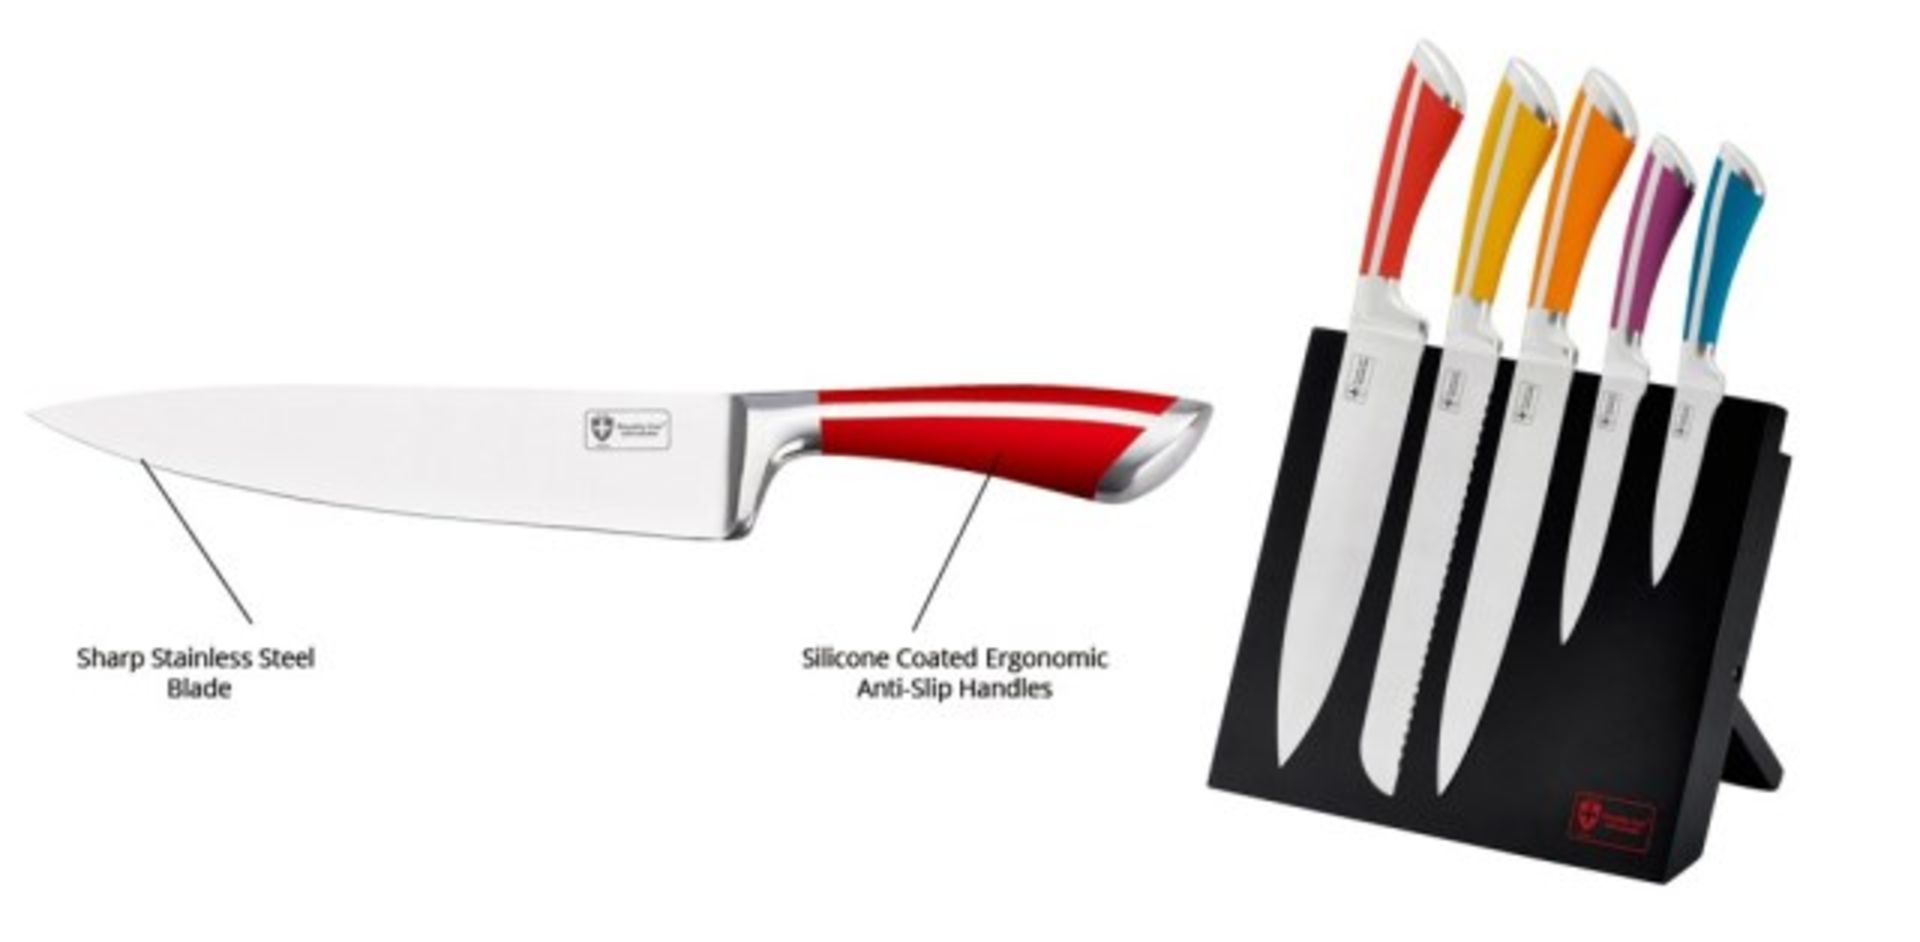 V Brand New 5 Piece Swiss Knife Set With Folding Magnetic Stand RRP199 Euros